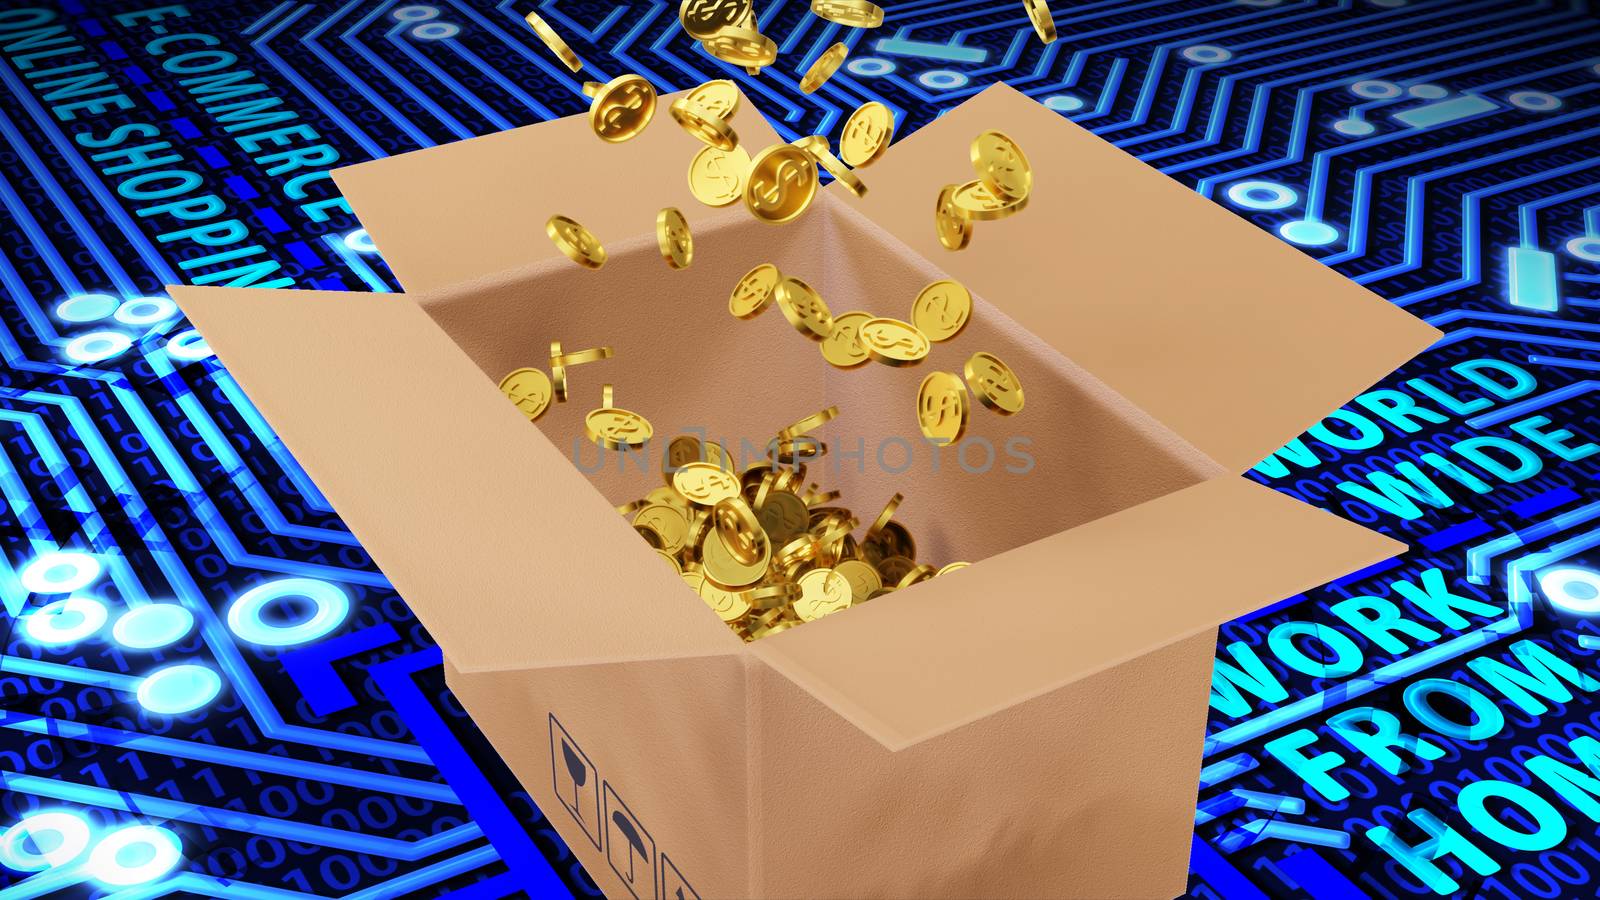 8K 3D Rendered a number of Golden Dollars Coins Falling into Brown Package on Circuit Board and Binary Code Background Still Image by ariya23156